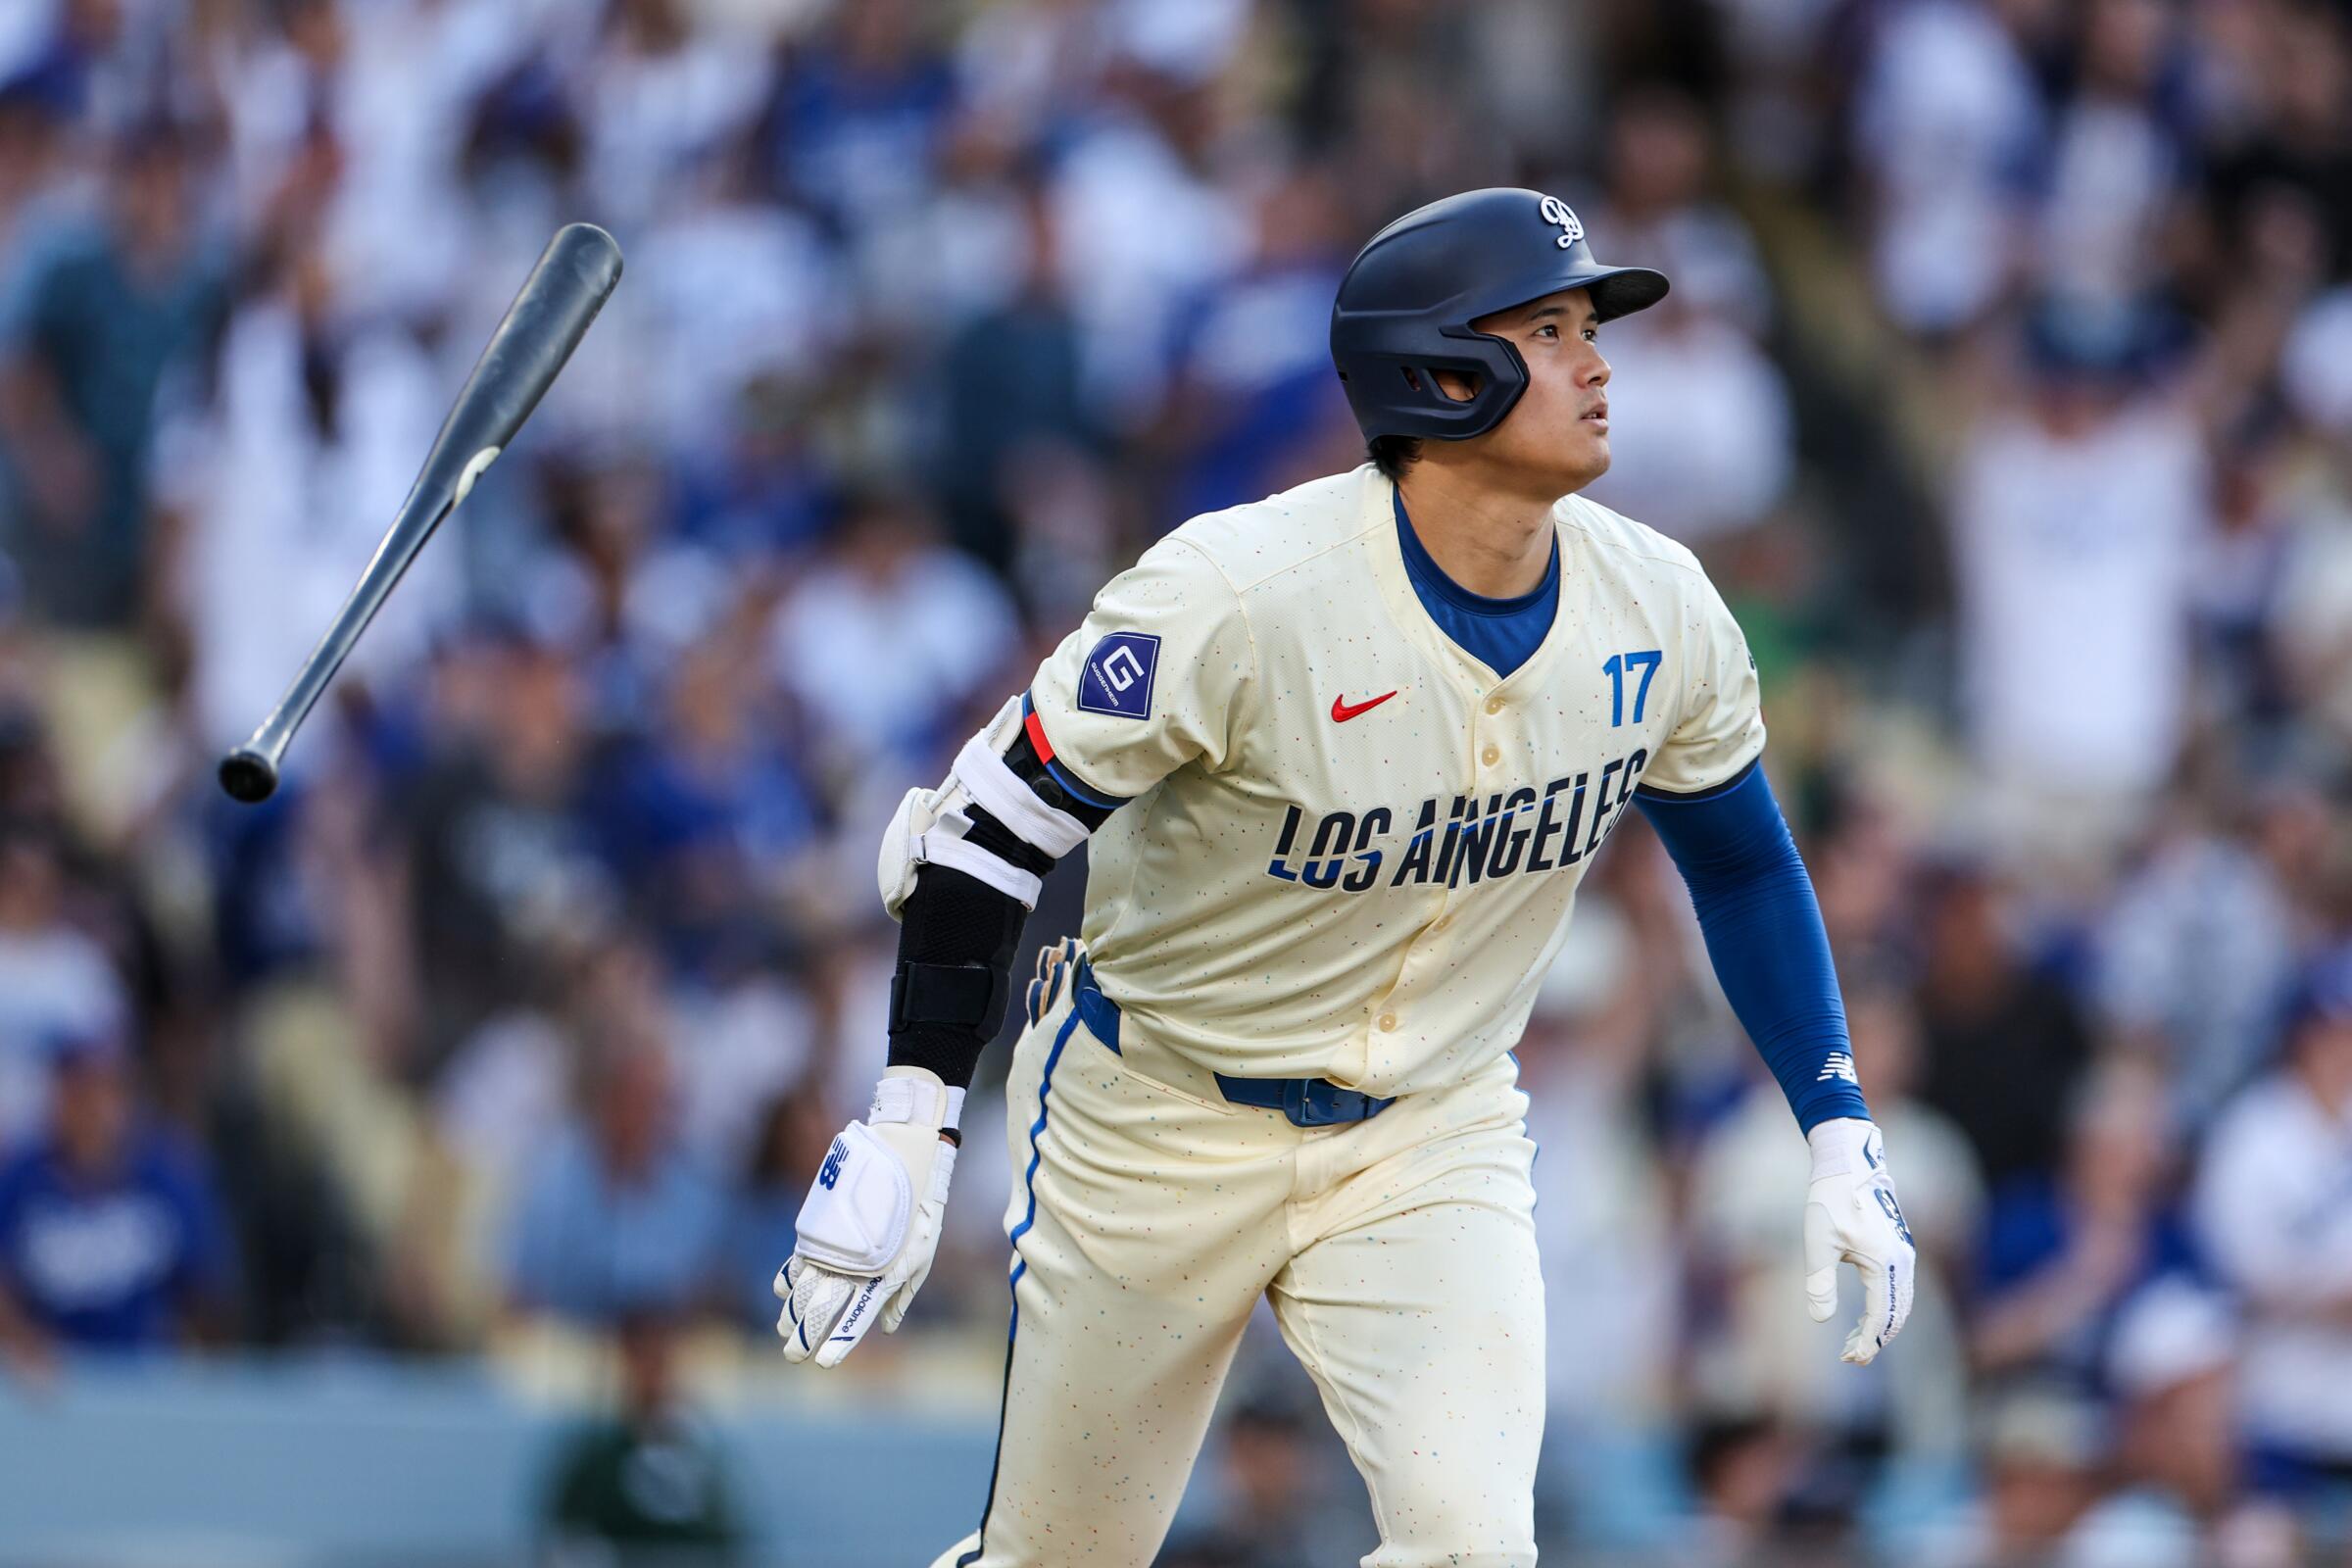 Dodgers star Shohei Ohtani hits a solo home run in the eighth inning of a 5-3 win over the Milwaukee Brewers.